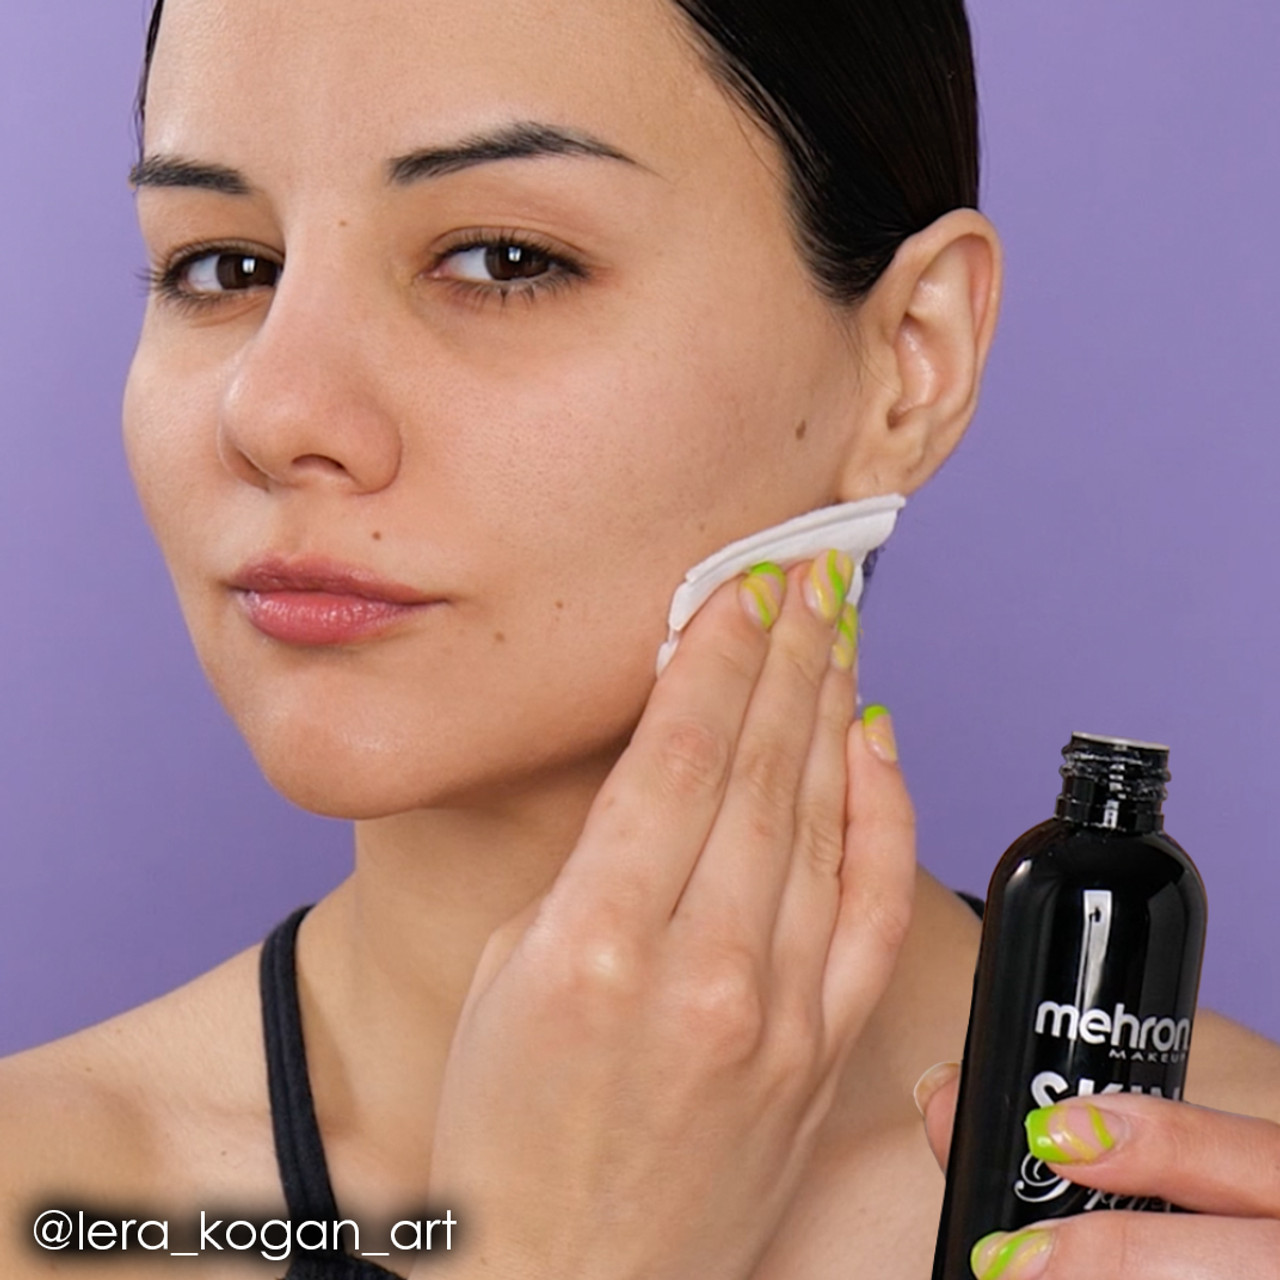 Mehron Makeup on X: Hydro Prep Pro™ hydrates and nourishes skin. Skin Prep  Pro™ mattifies and extends the wear of makeup. This duo creates the perfect  makeup base! Get both and save